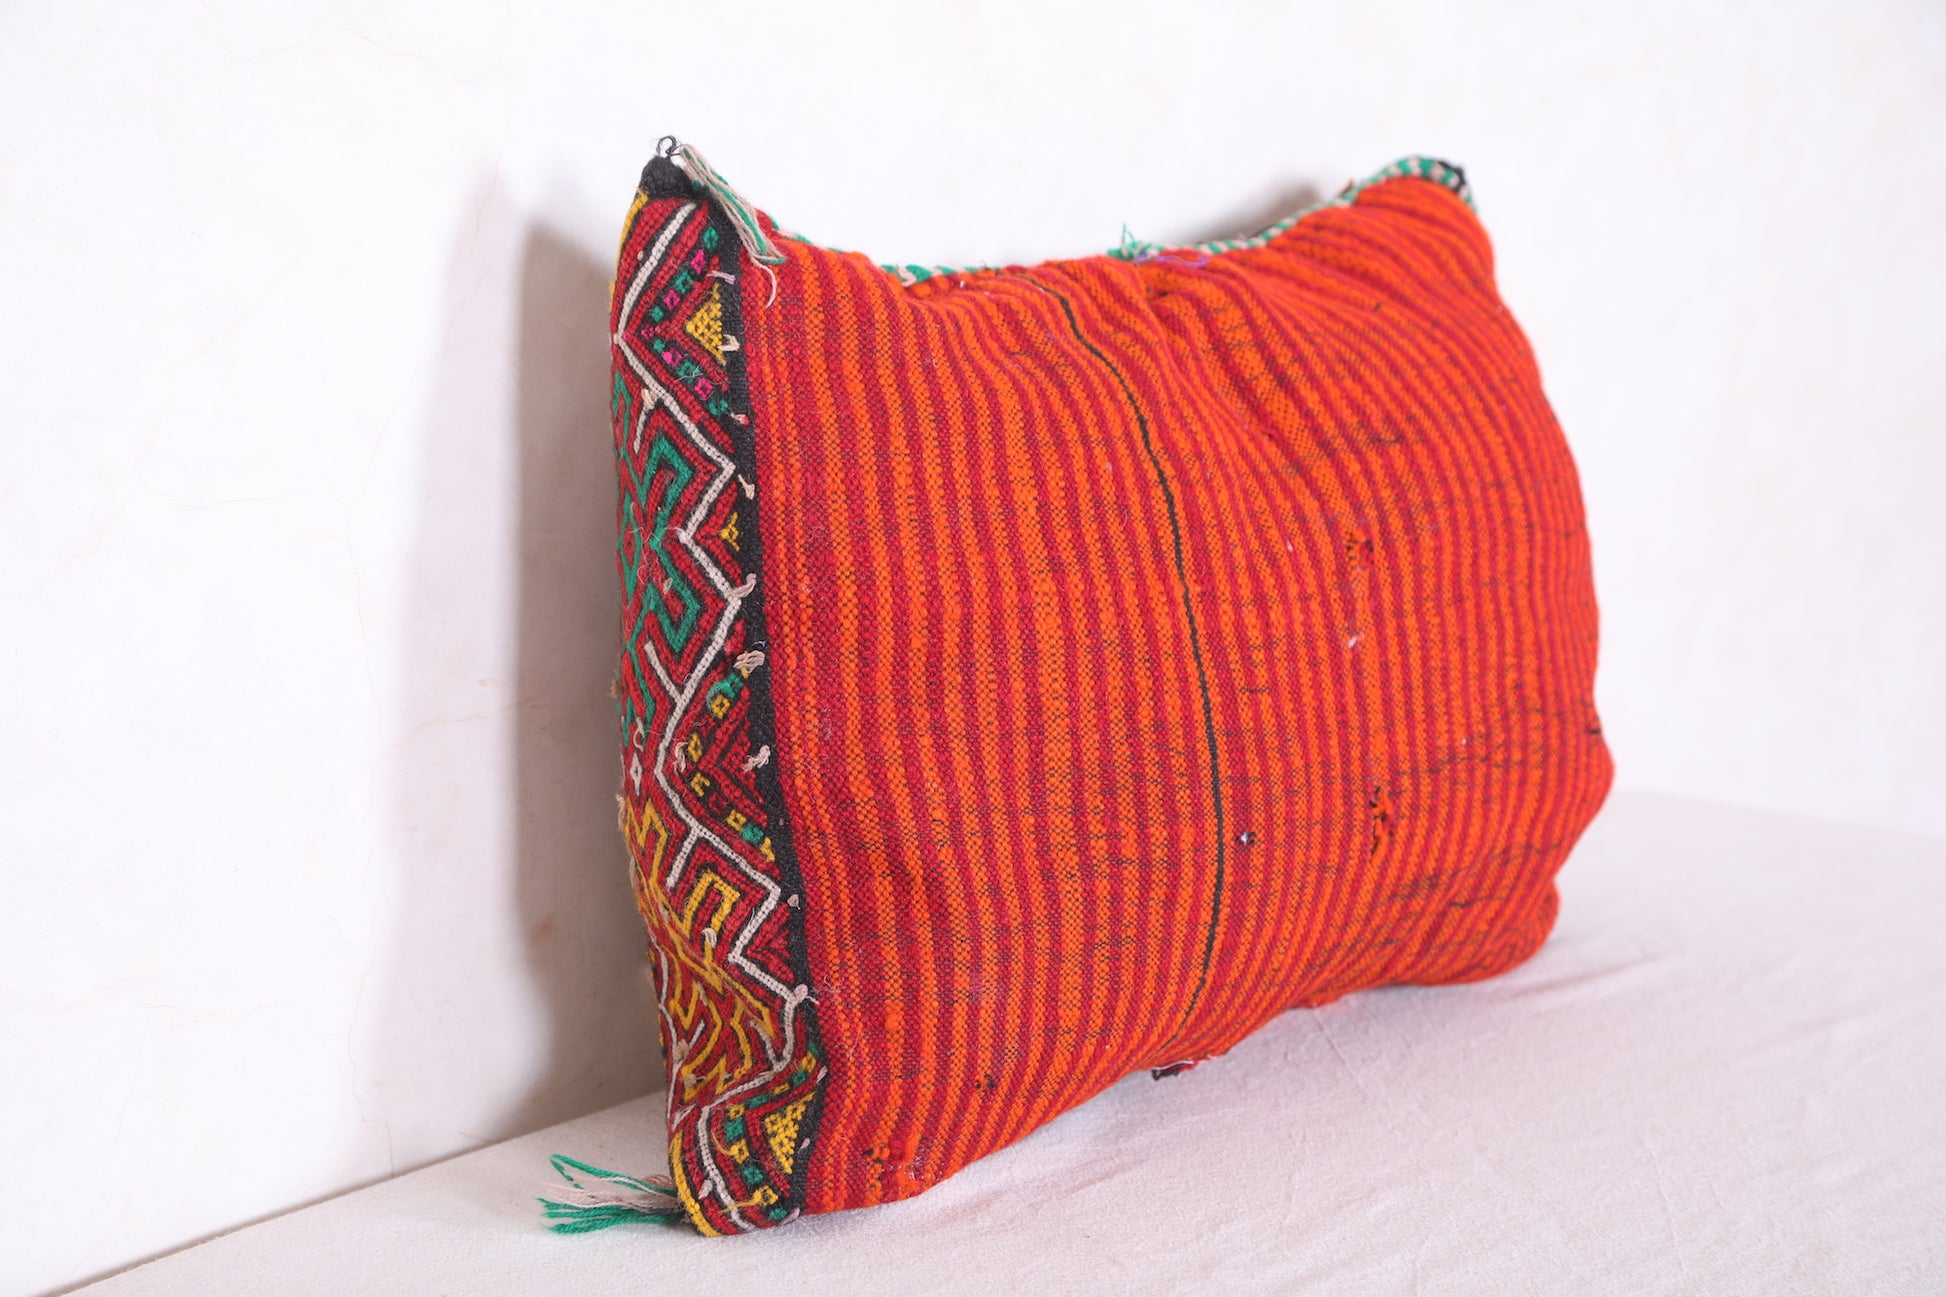 Vintage Moroccan Kilim Pillow 15.3 INCHES X 22.8 INCHES